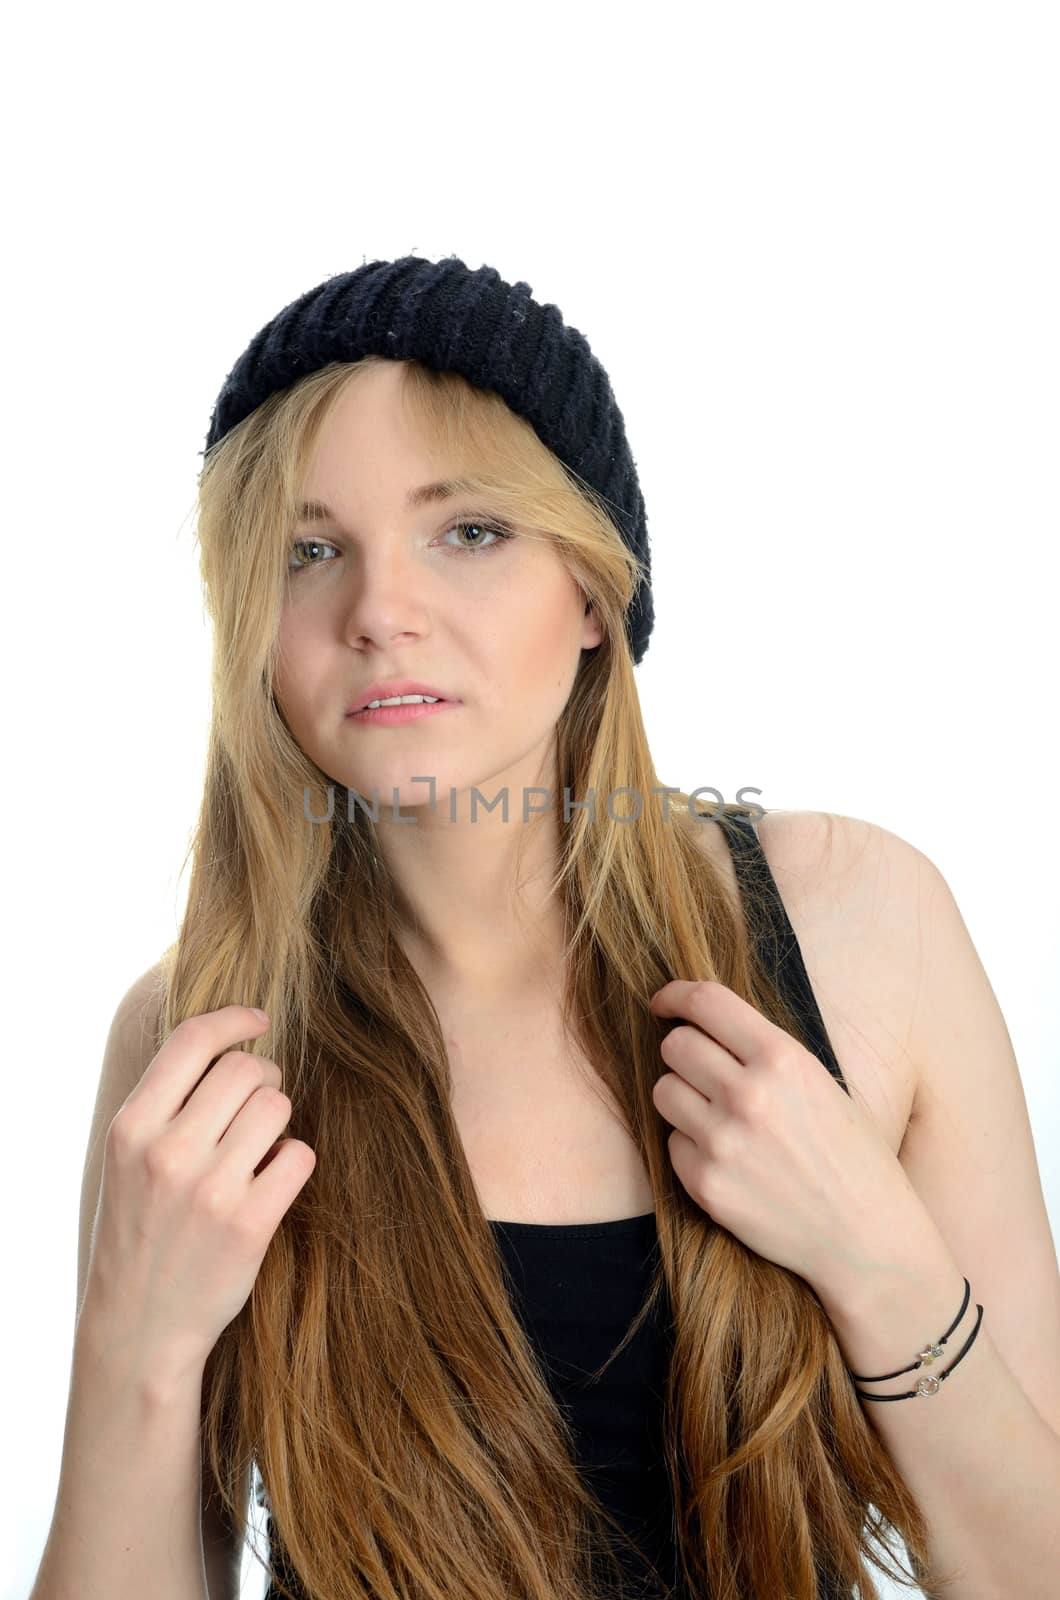 Elegant female model with kind face expression. Young girl with blond hairs and black hat.